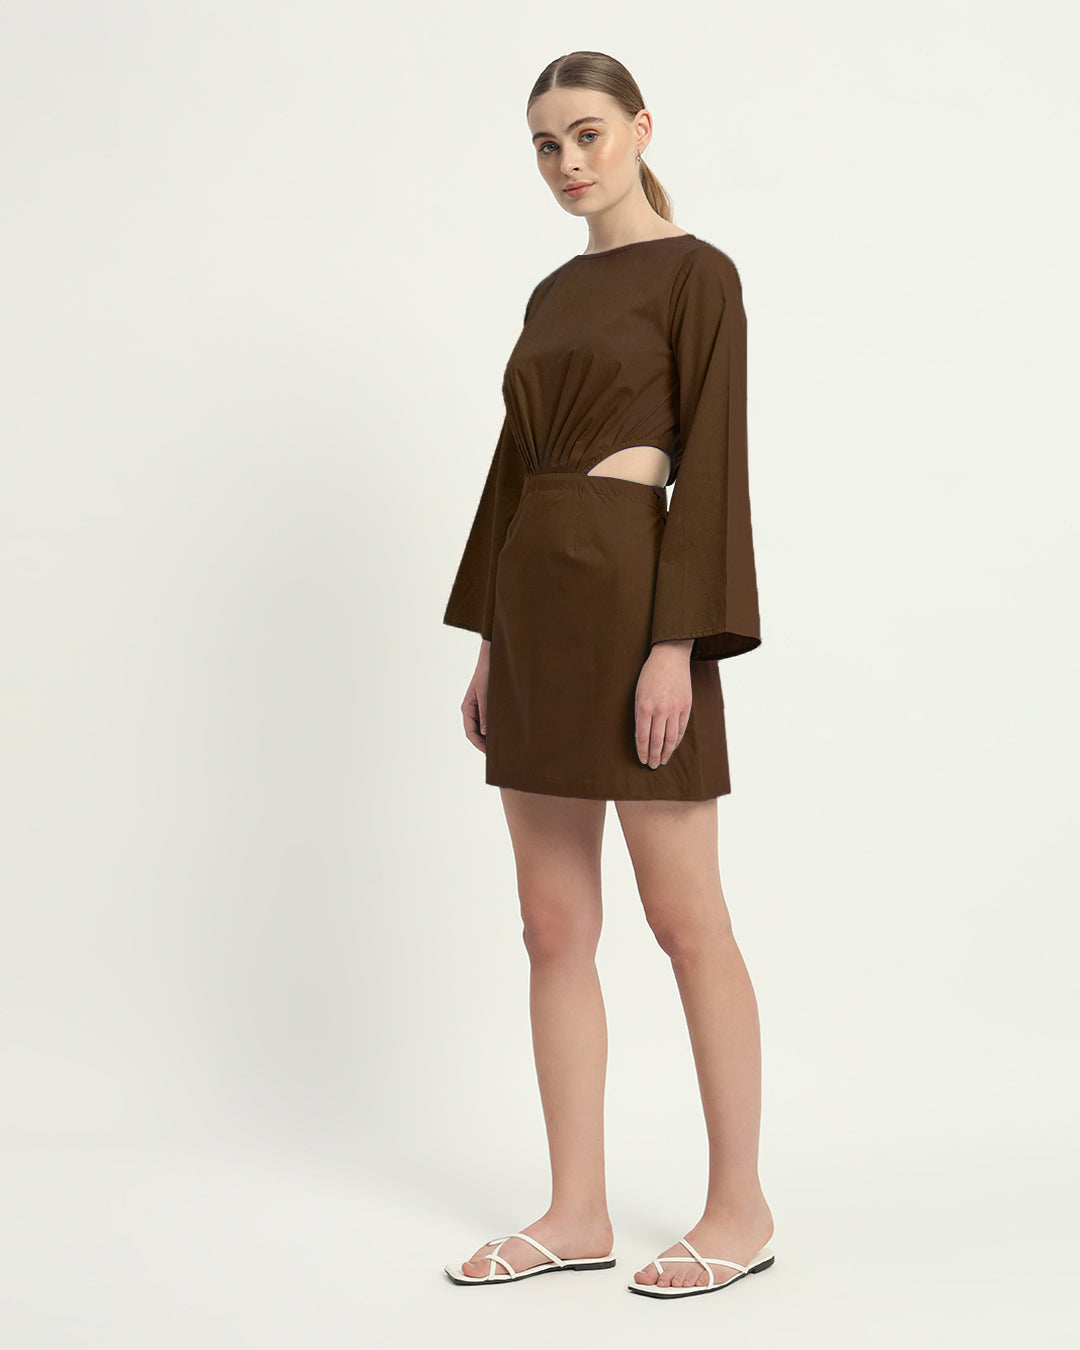 The Eloy Nutshell Cotton Dress